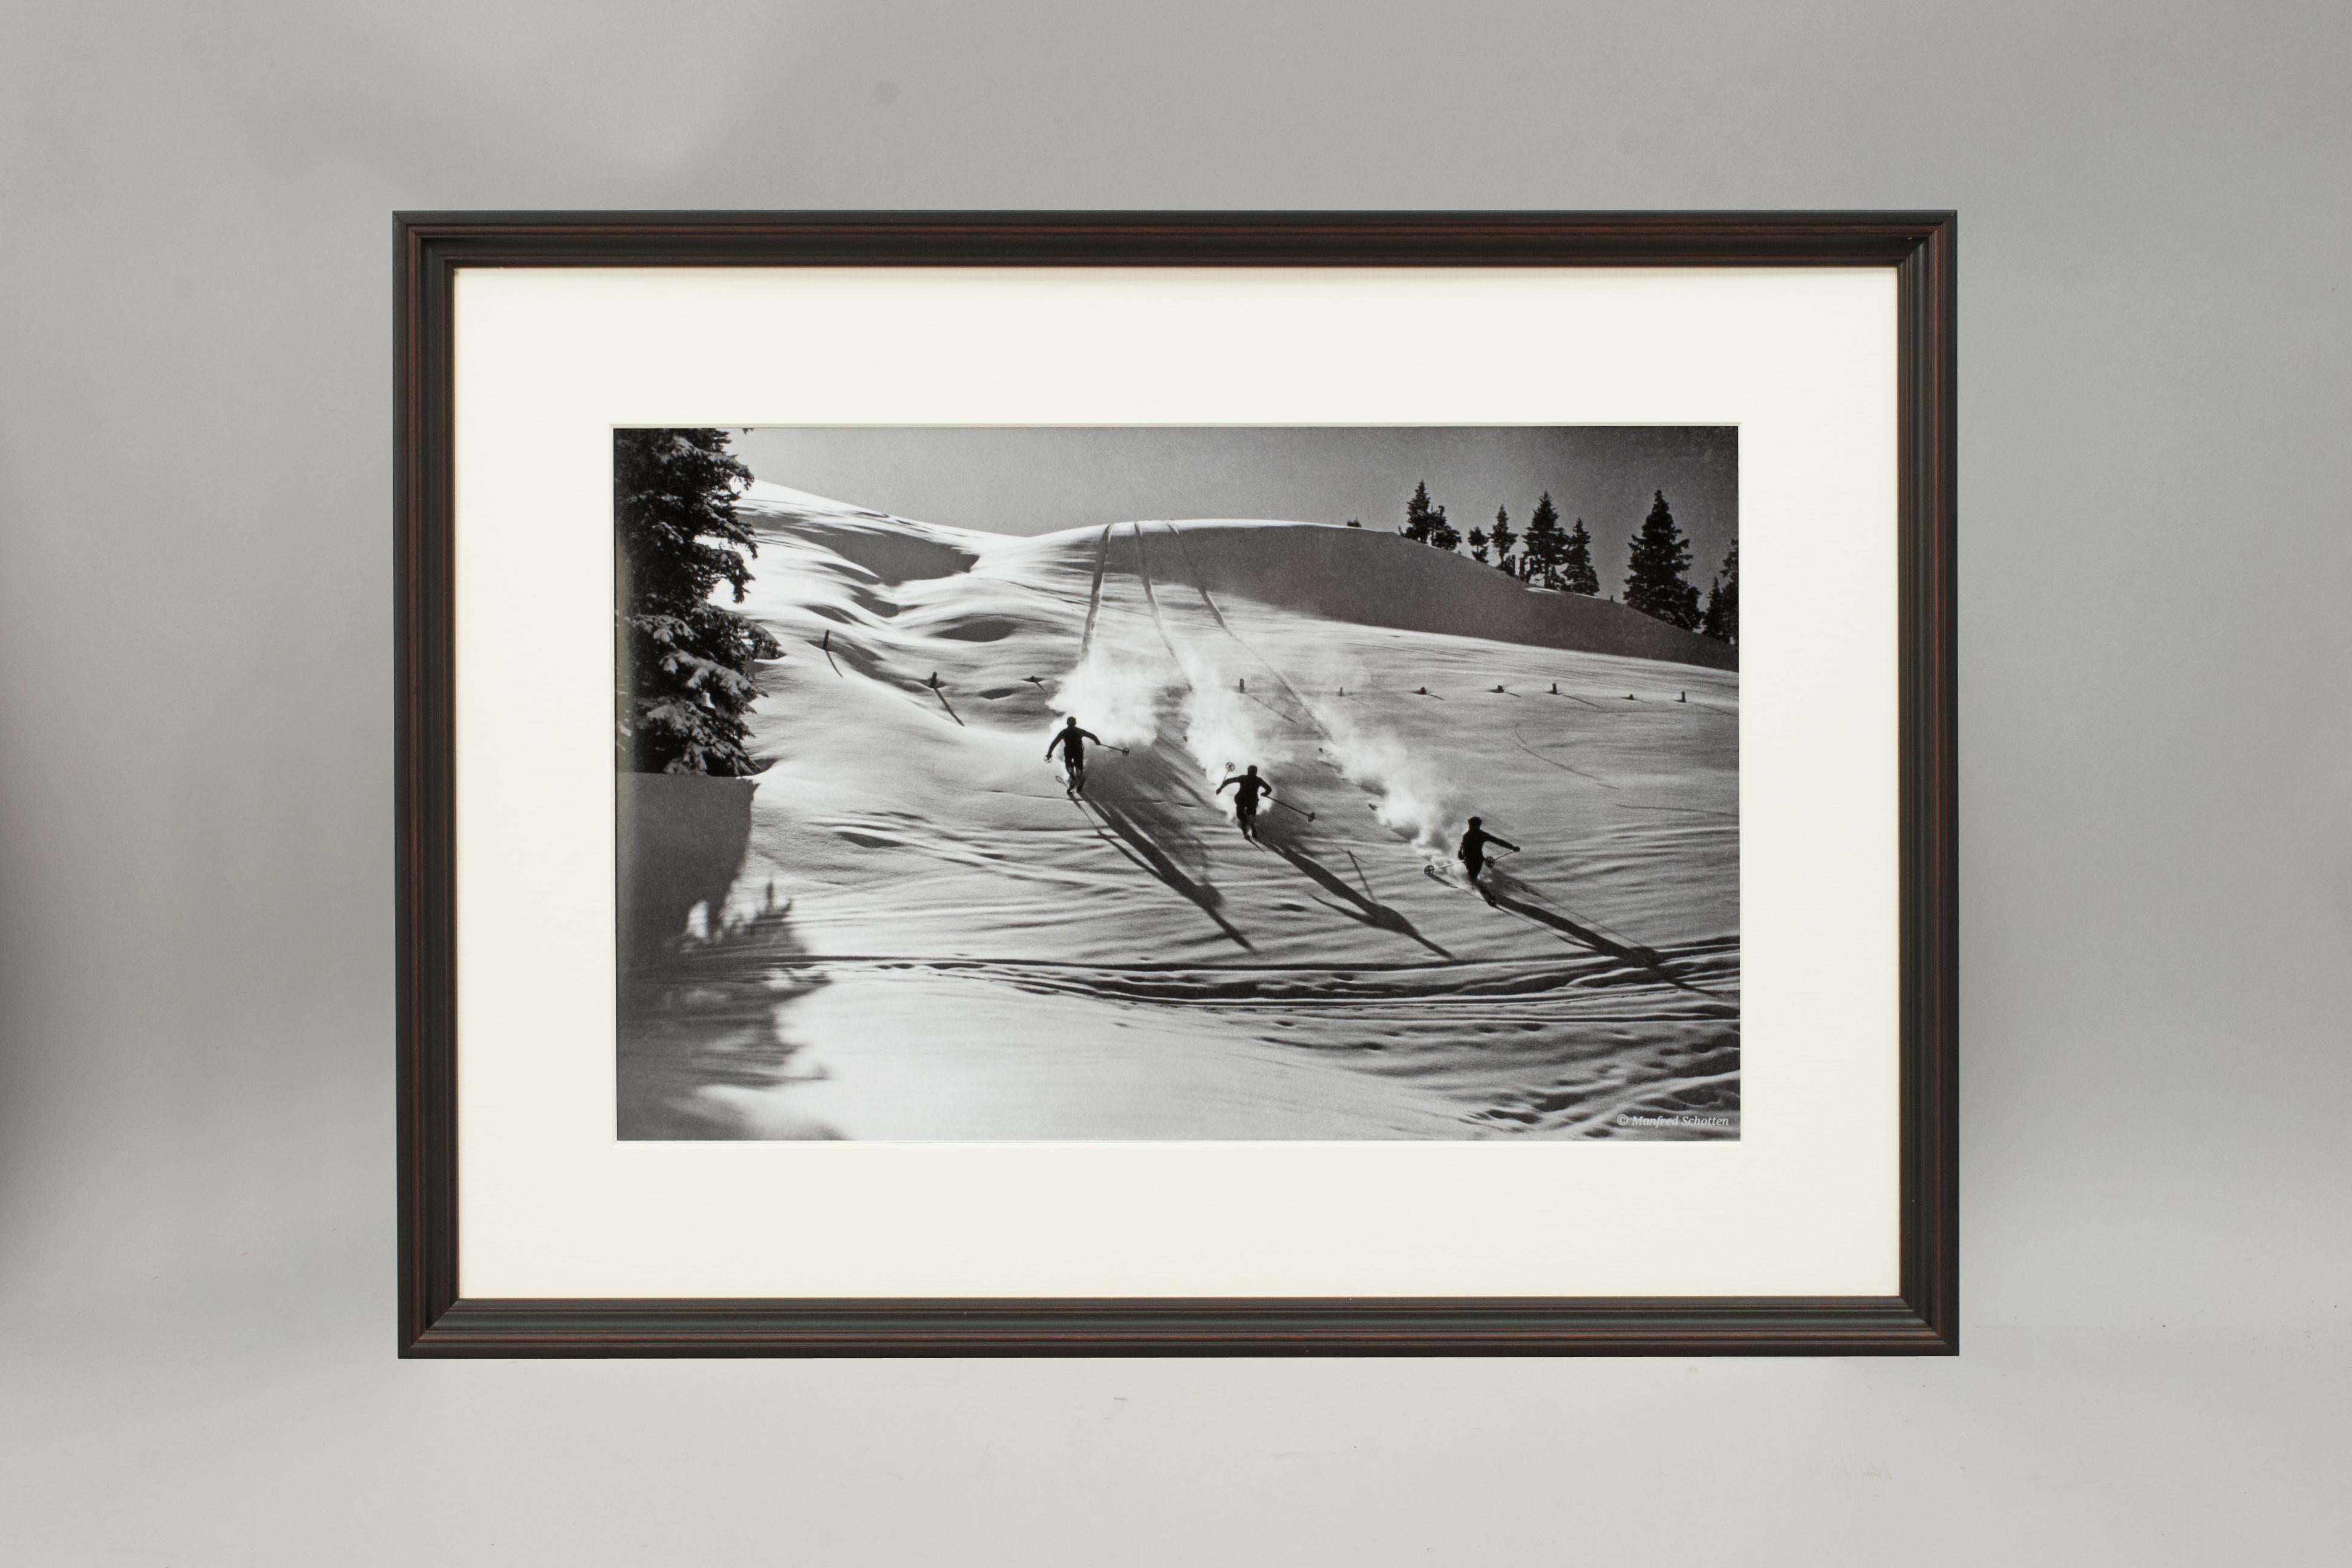 'DESCENT IN POWDER', a modern framed and mounted black and white photograph after an original 1930's skiing photograph. The frame is black with burgundy undercoat, the glazing is clarity+ premium synthetic glass. Black & white alpine photos are the